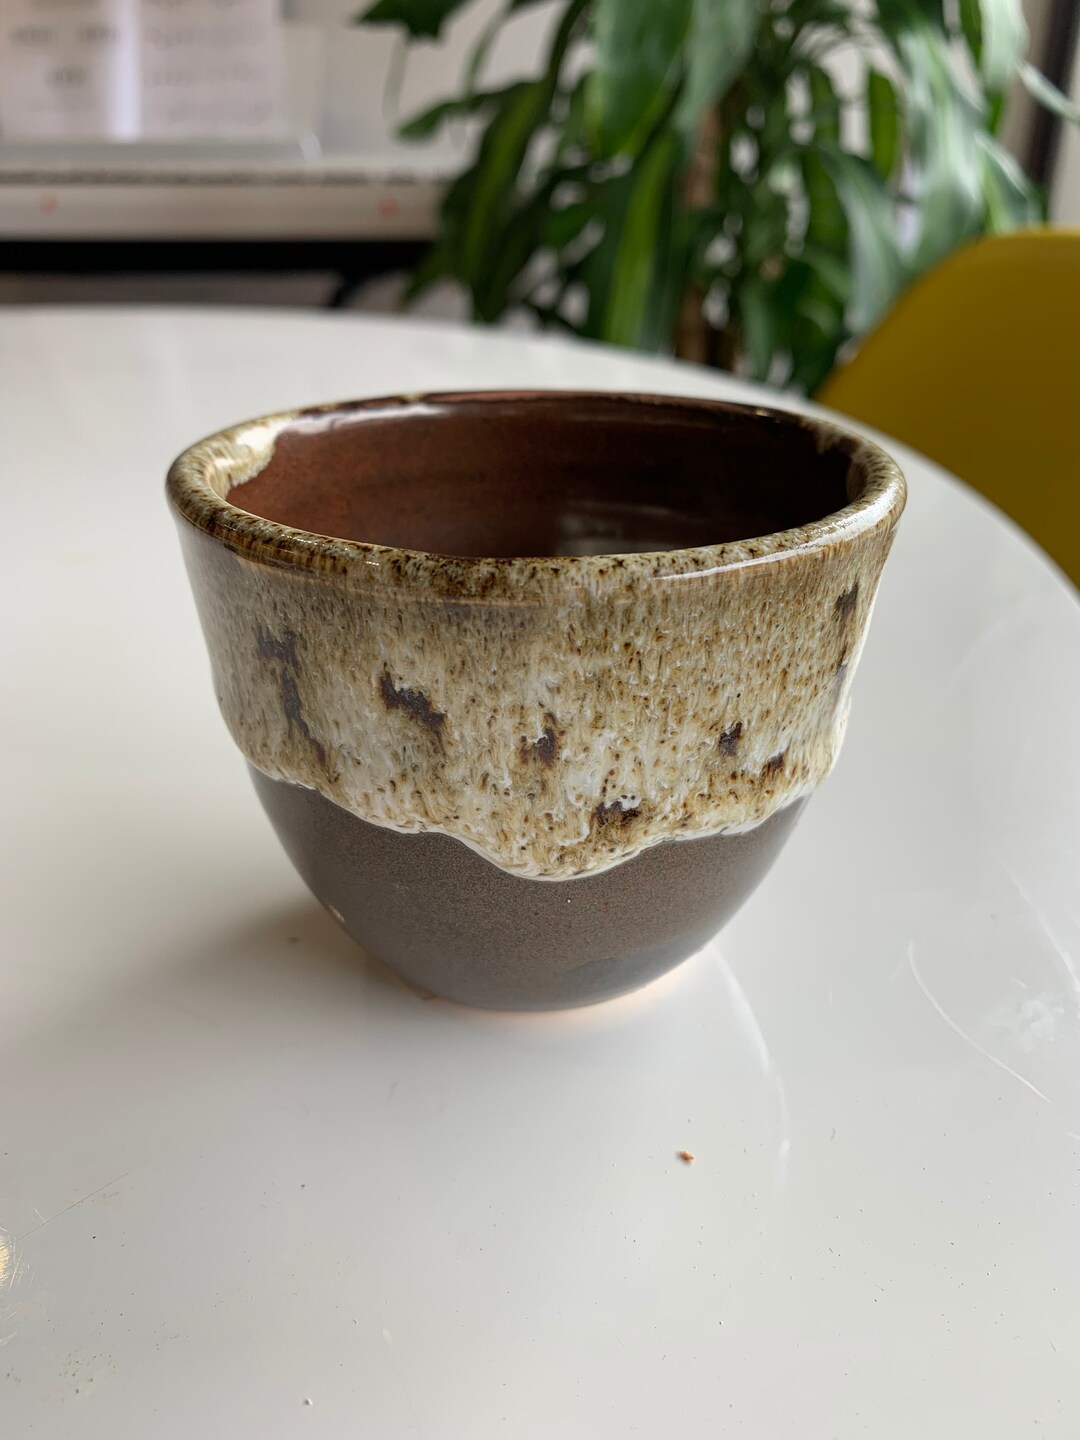 Handmade Ceramic Keep-cup lid Included 6oz, 7oz, 8oz, Coffee, Espresso,  Piccolo, Latte Mother's Day Gift Pottery Travel 